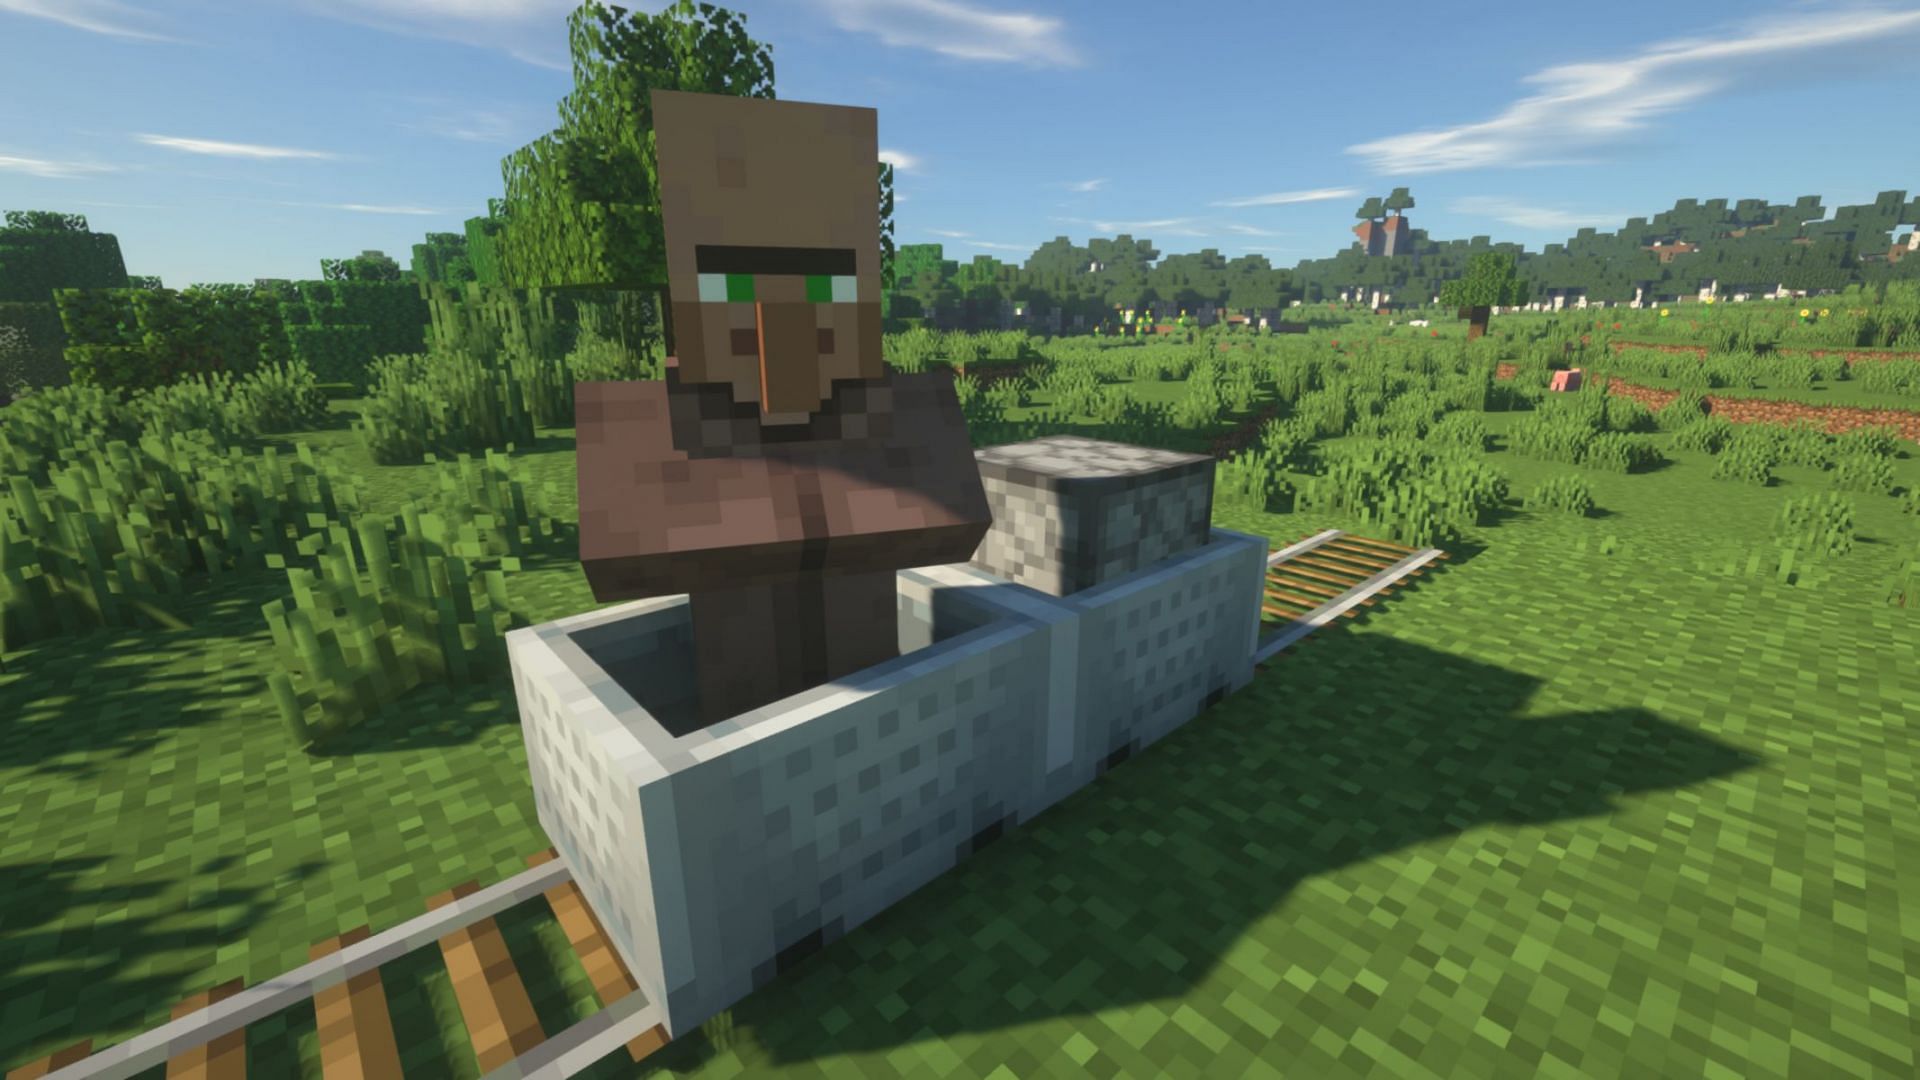 A villager in a minecart prepared in front of a furnace minecart (Image via Mojang)